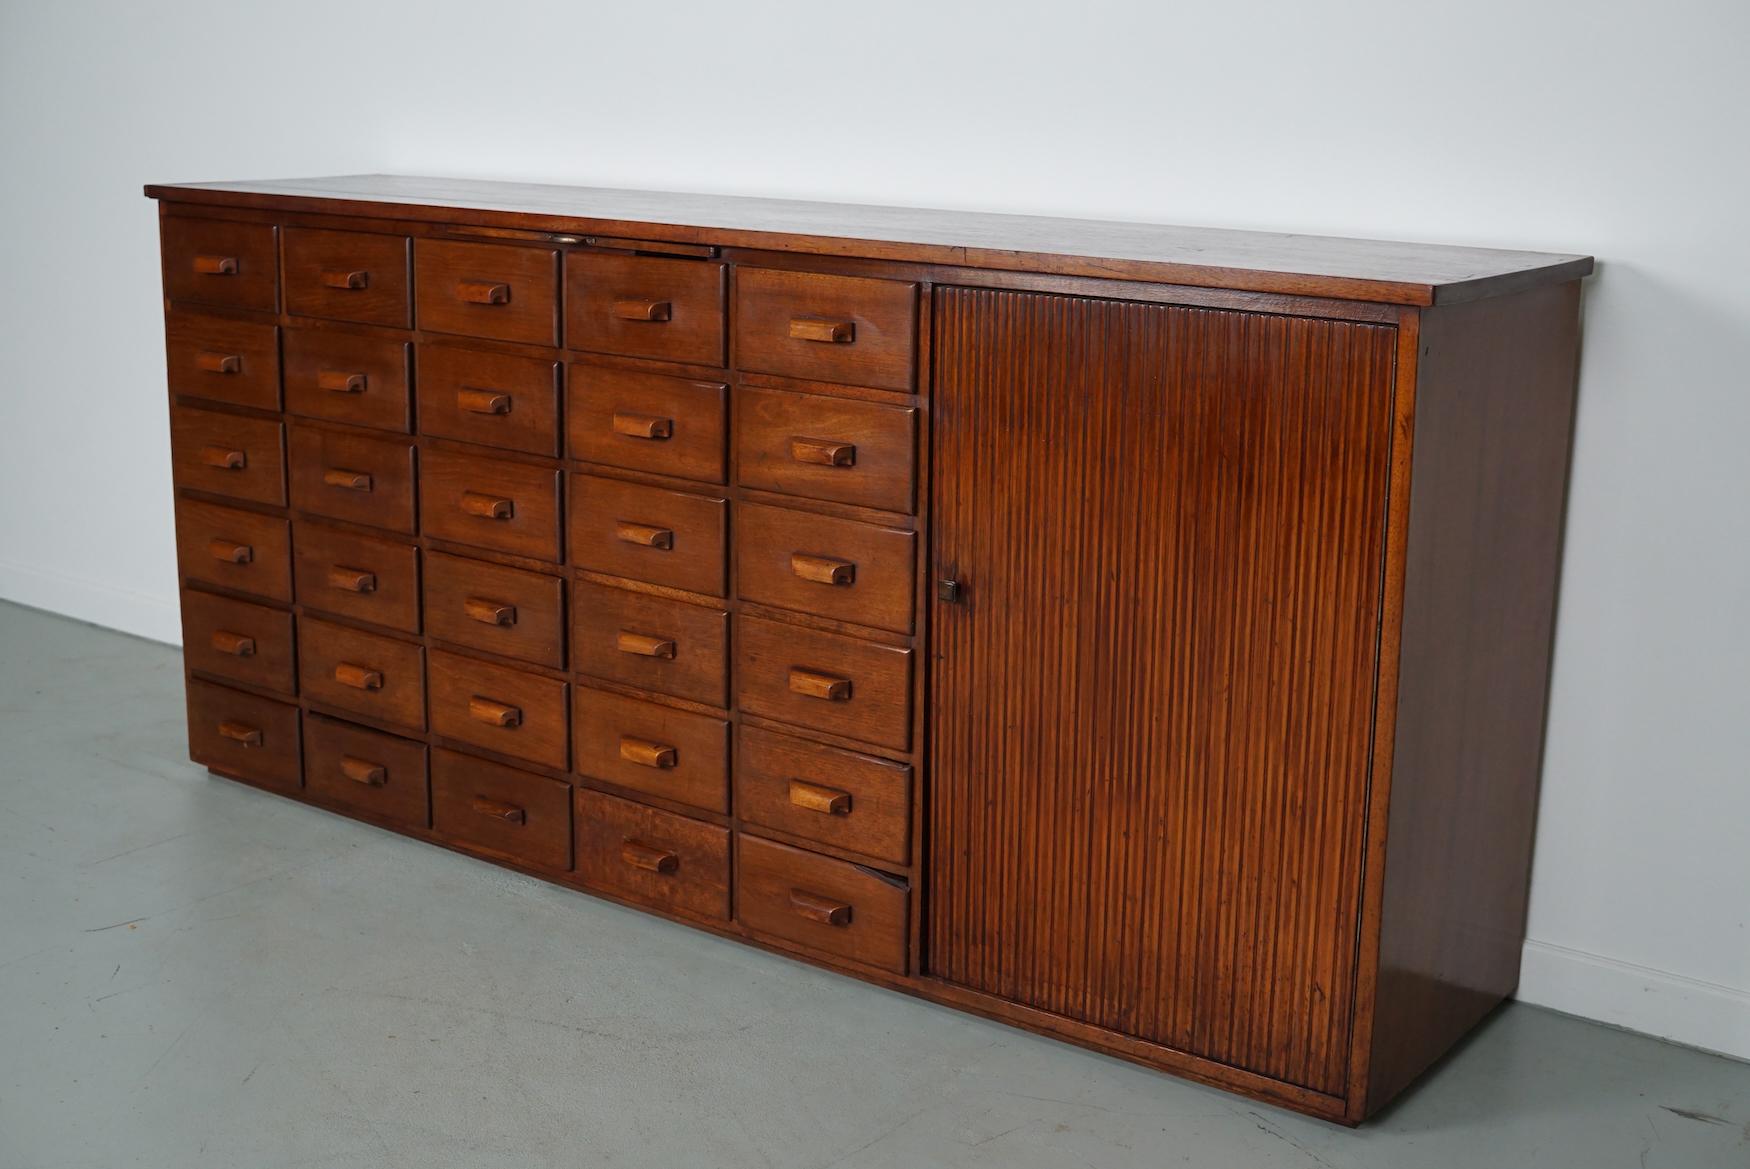 This cabinet was produced during the 1950/60s in the Netherlands. It features drawers in mahogany  and a large door with a shelve behind it. It was originally used in pharmacy in Amsterdam. The interior dimensions of the drawers are: D x W x H 34 x